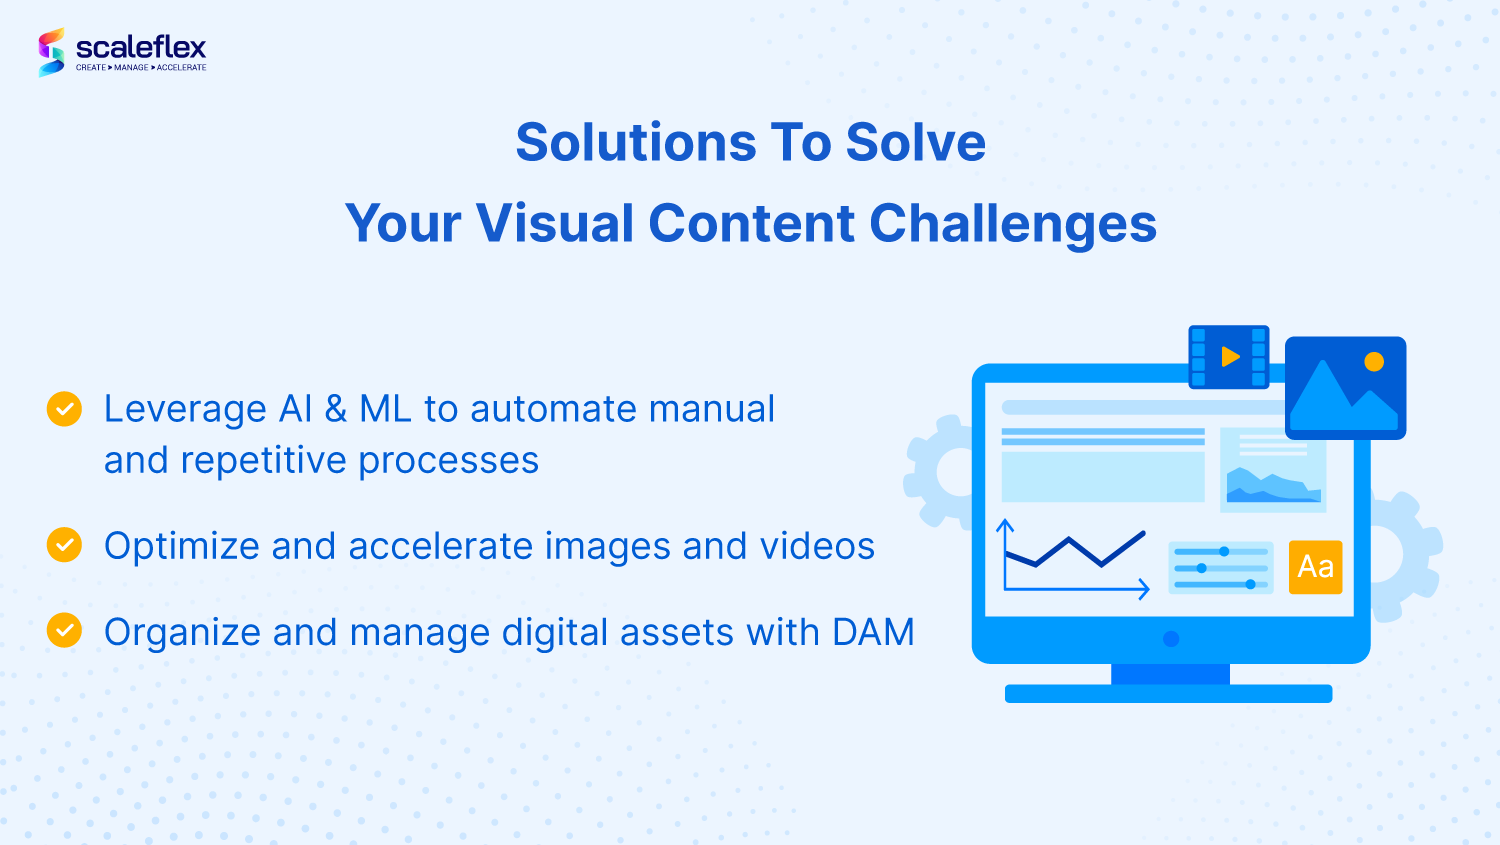  Solutions to solve visual content challenges